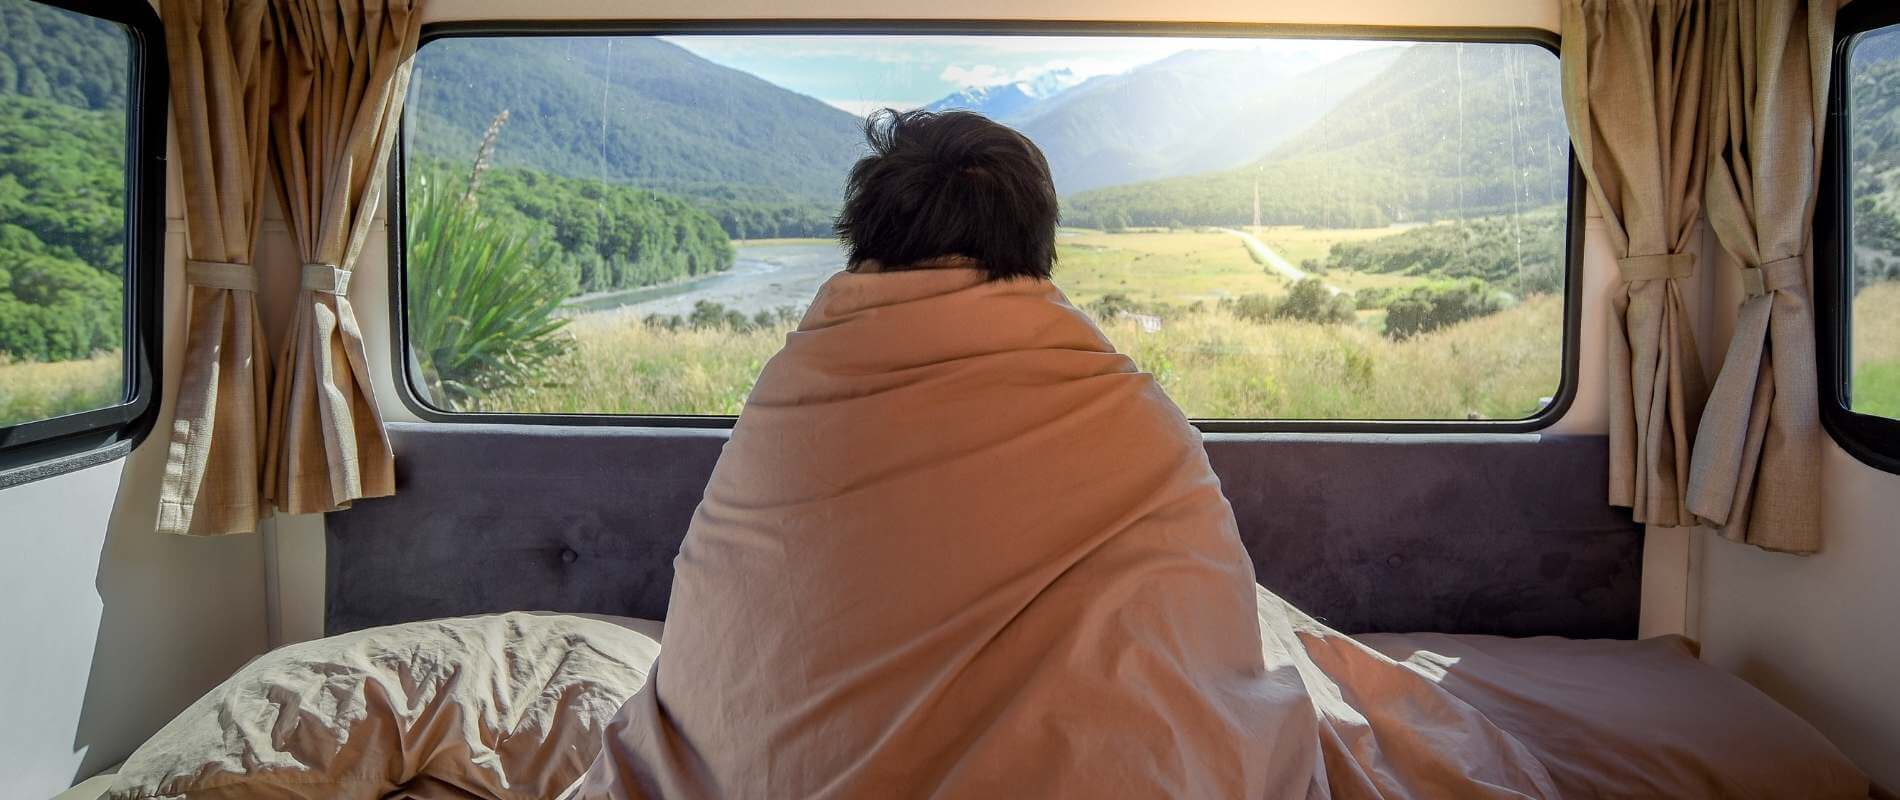 Using Blankets for RV Curtains